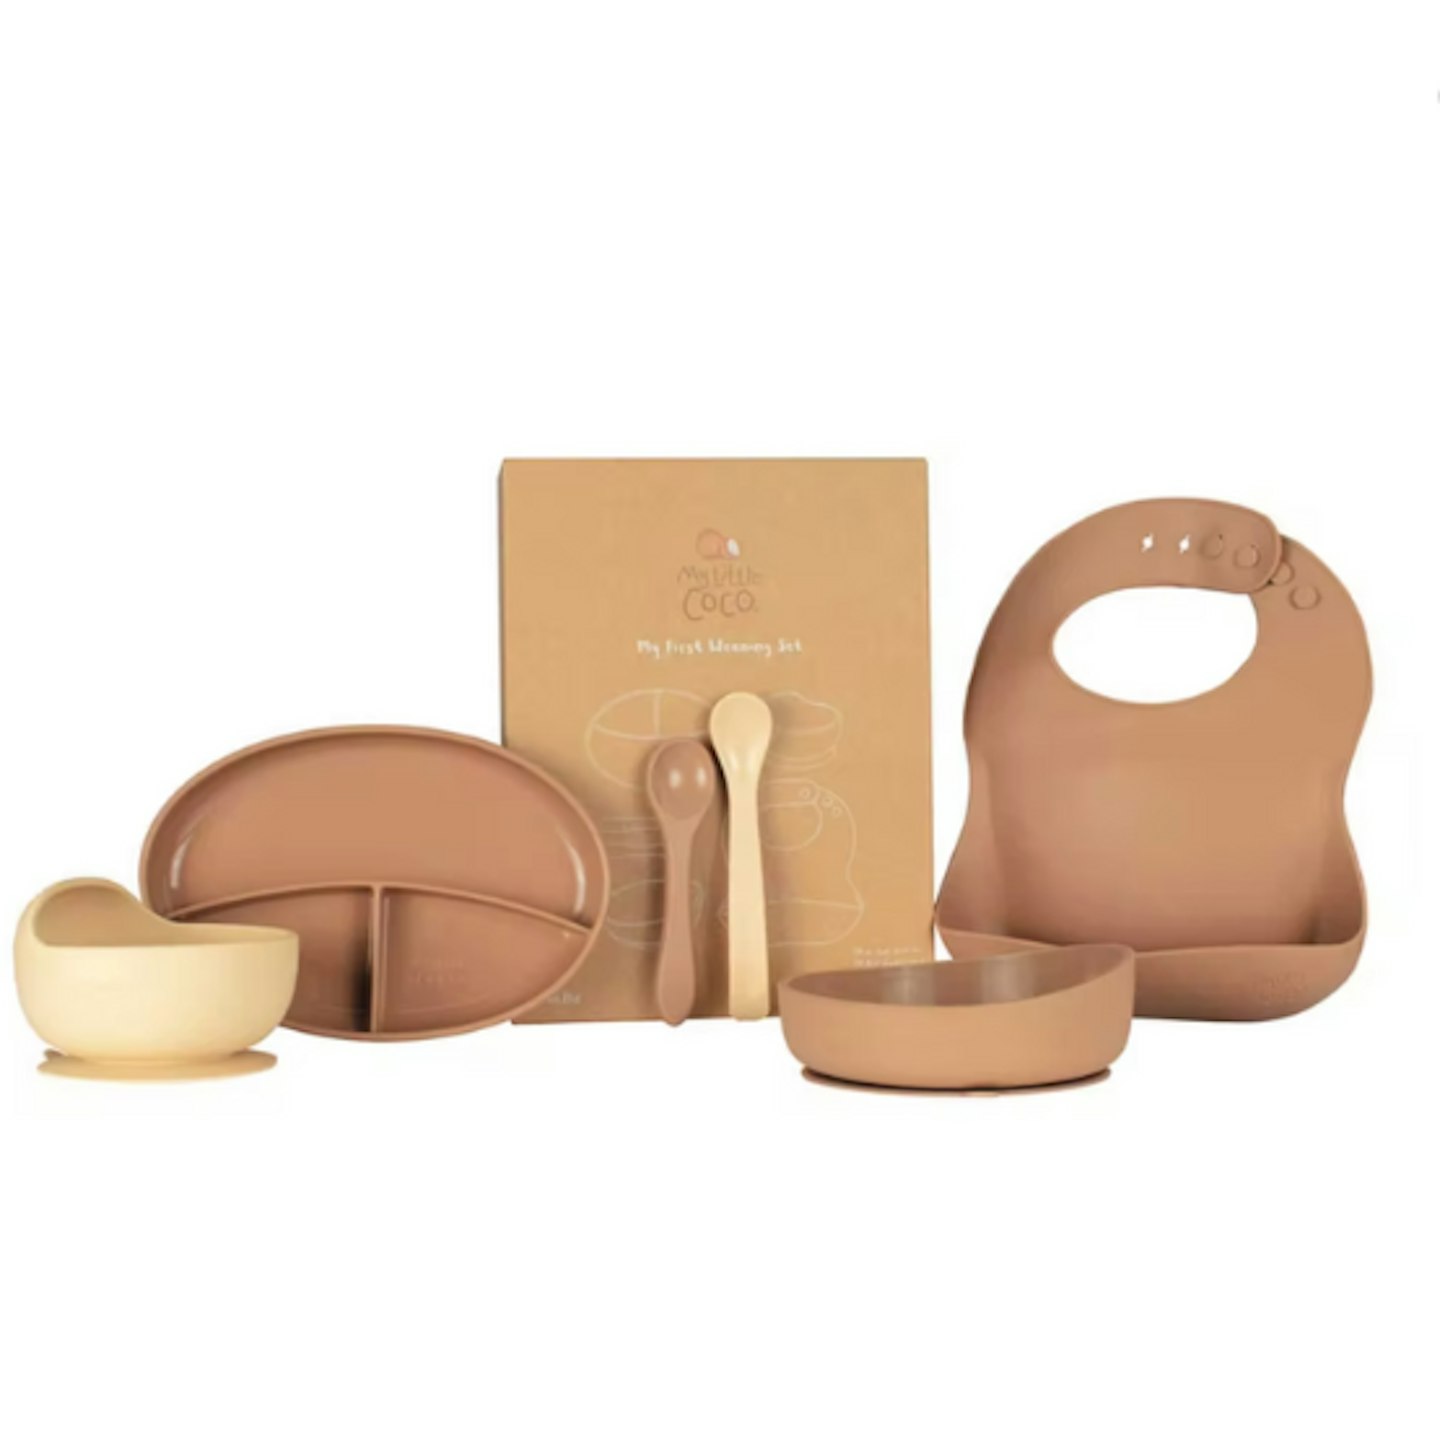 Black Friday baby deals weaning set